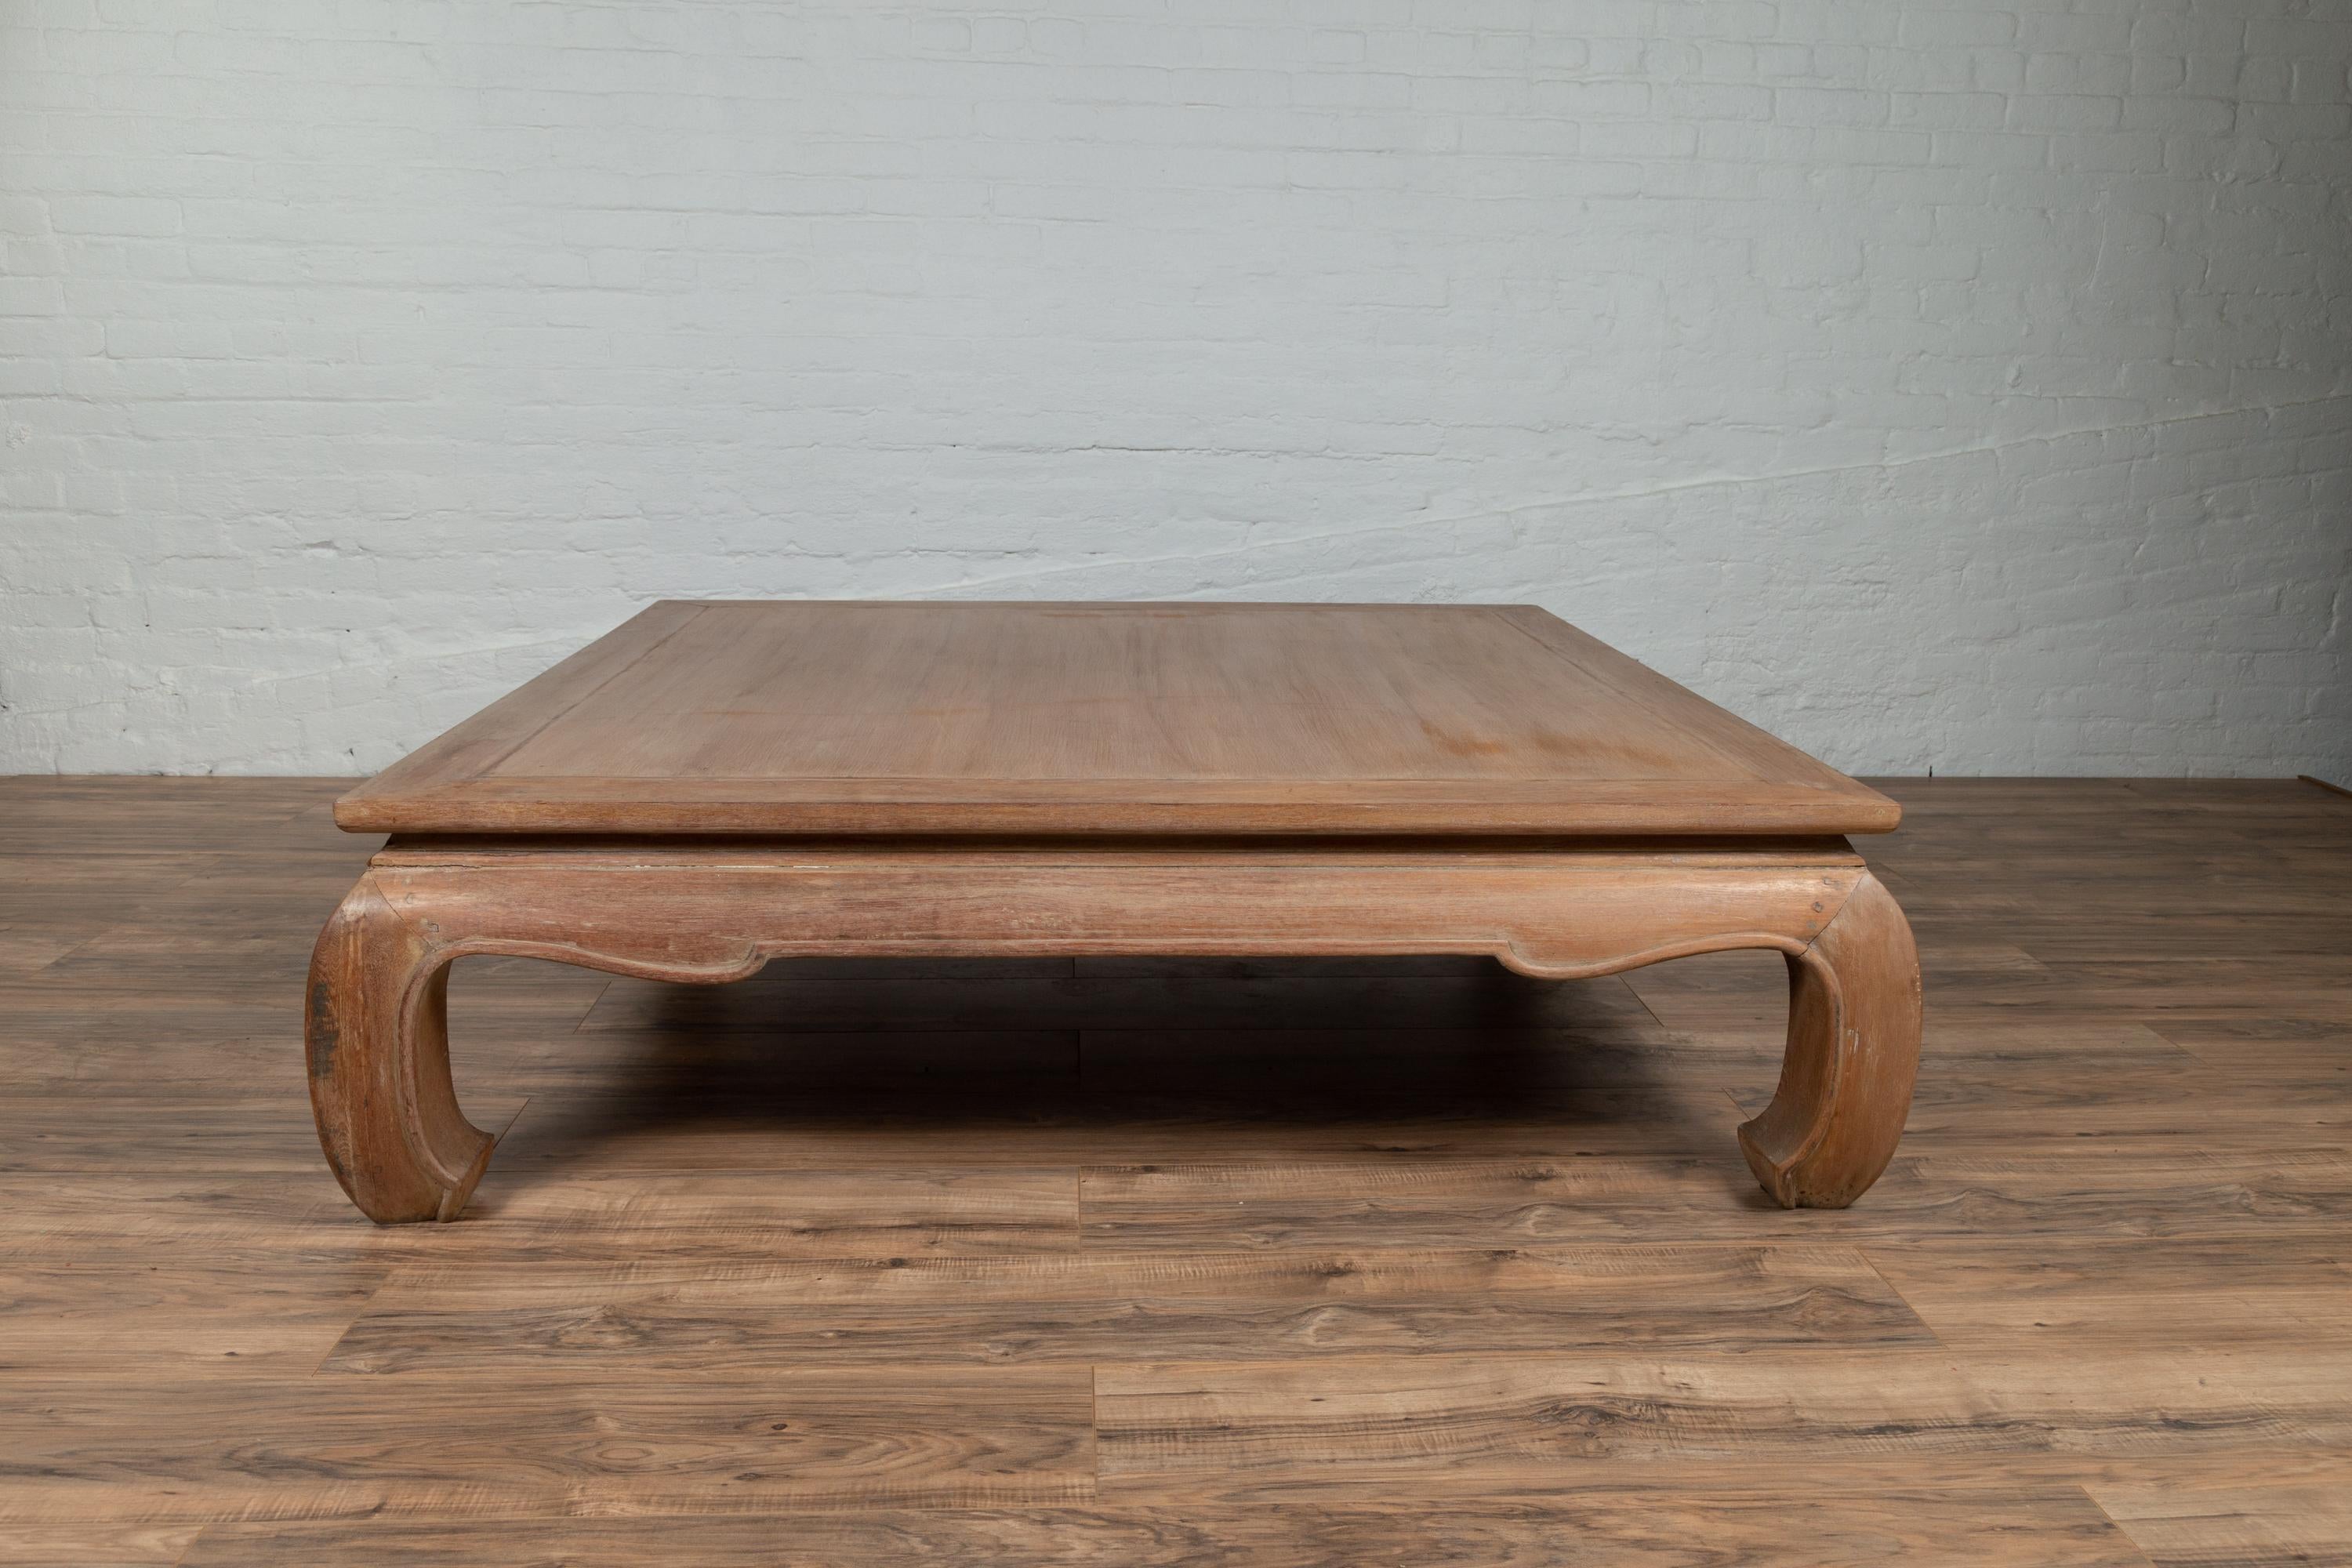 Chinese Antique Coffee Table with Natural Patina, Bulging Legs and Waisted Apron 2